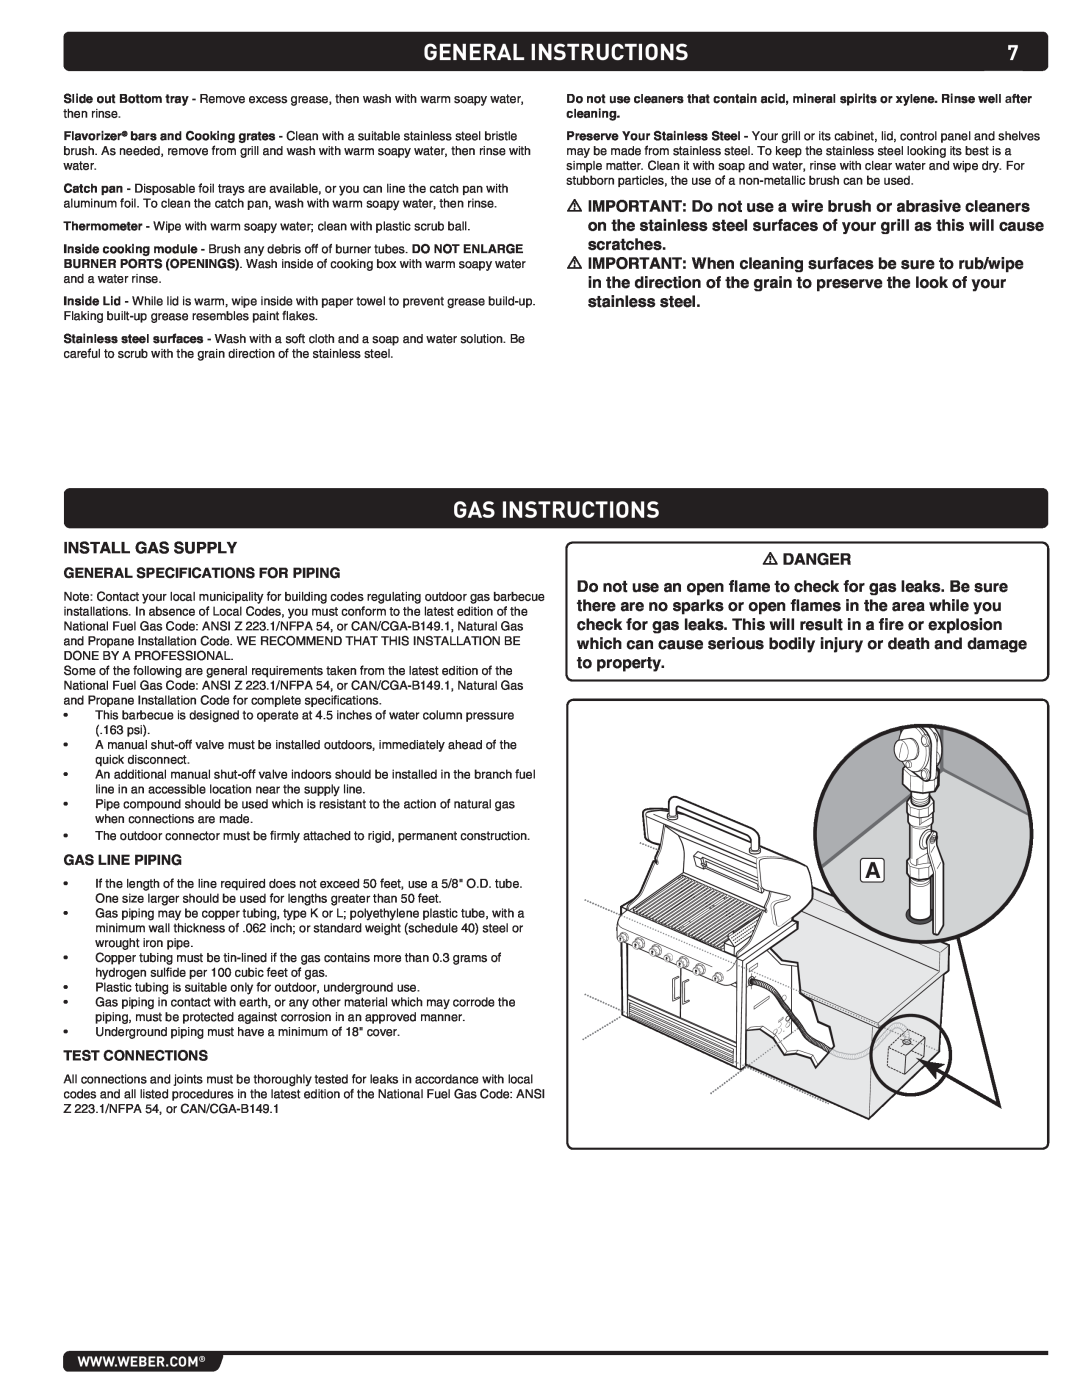 Weber S-460 manual Gas Instructions 